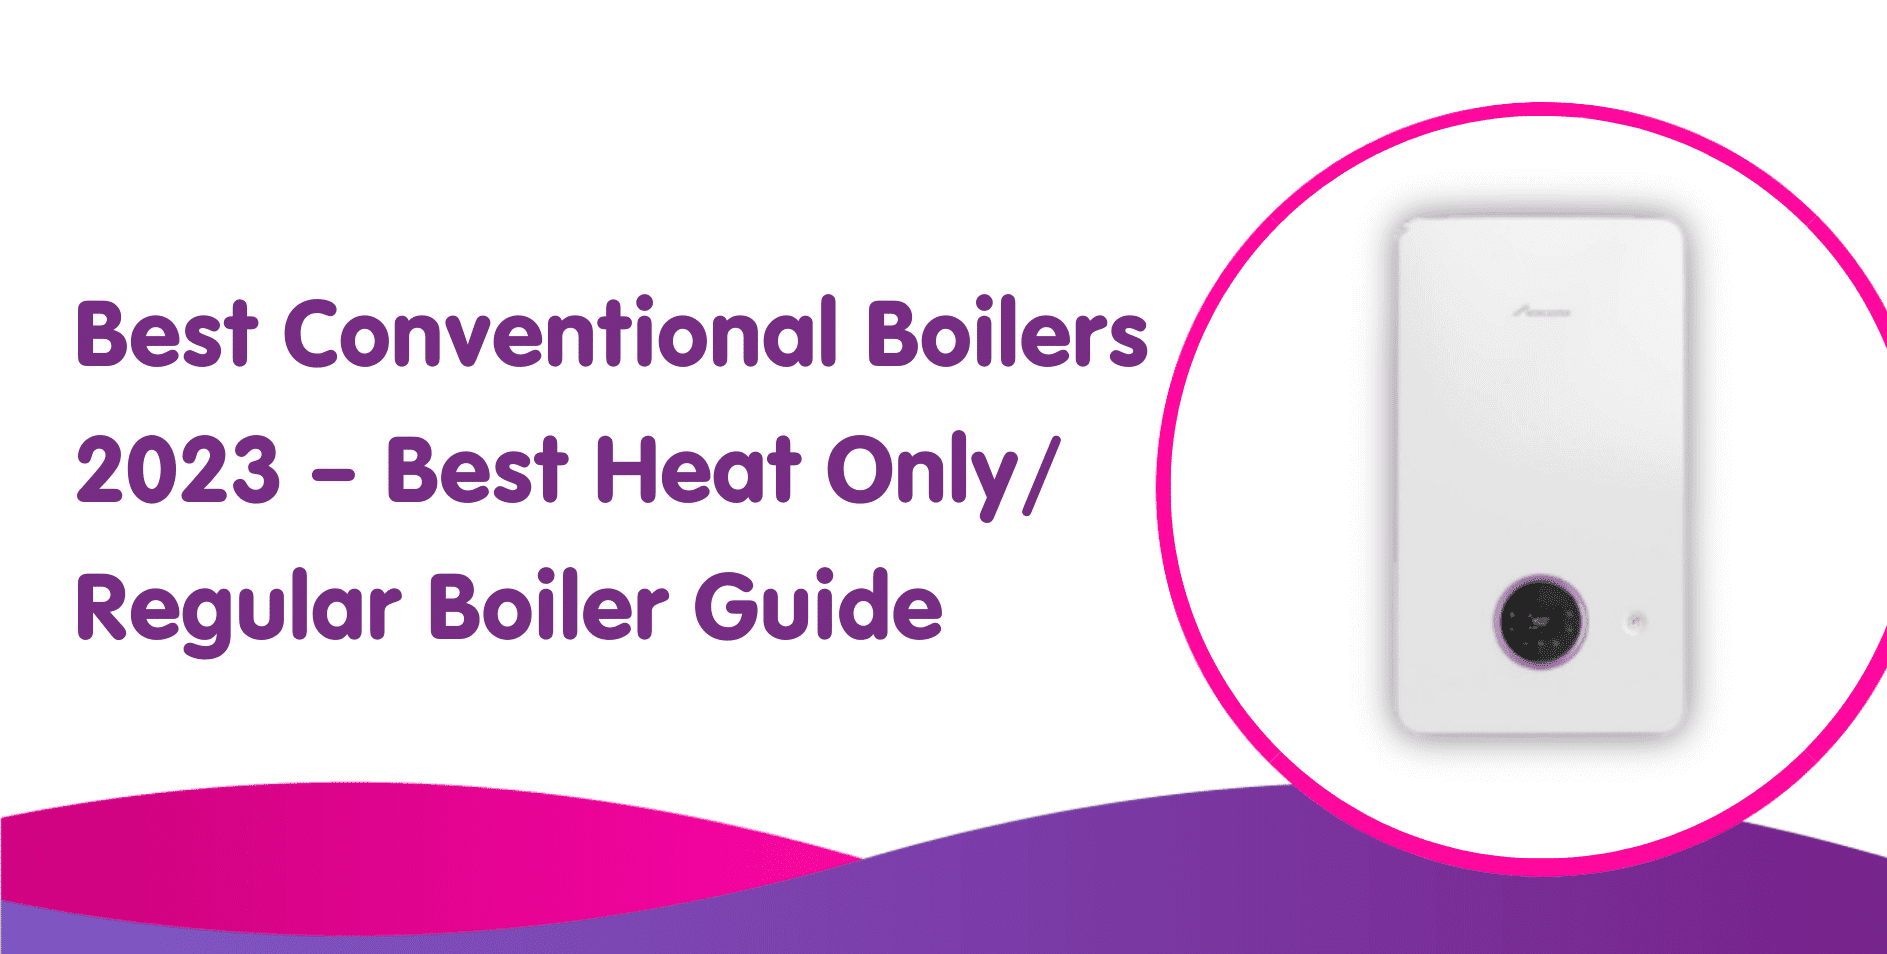 Best Conventional Boilers 2023 – Best Heat Only/ Regular Boiler Guide